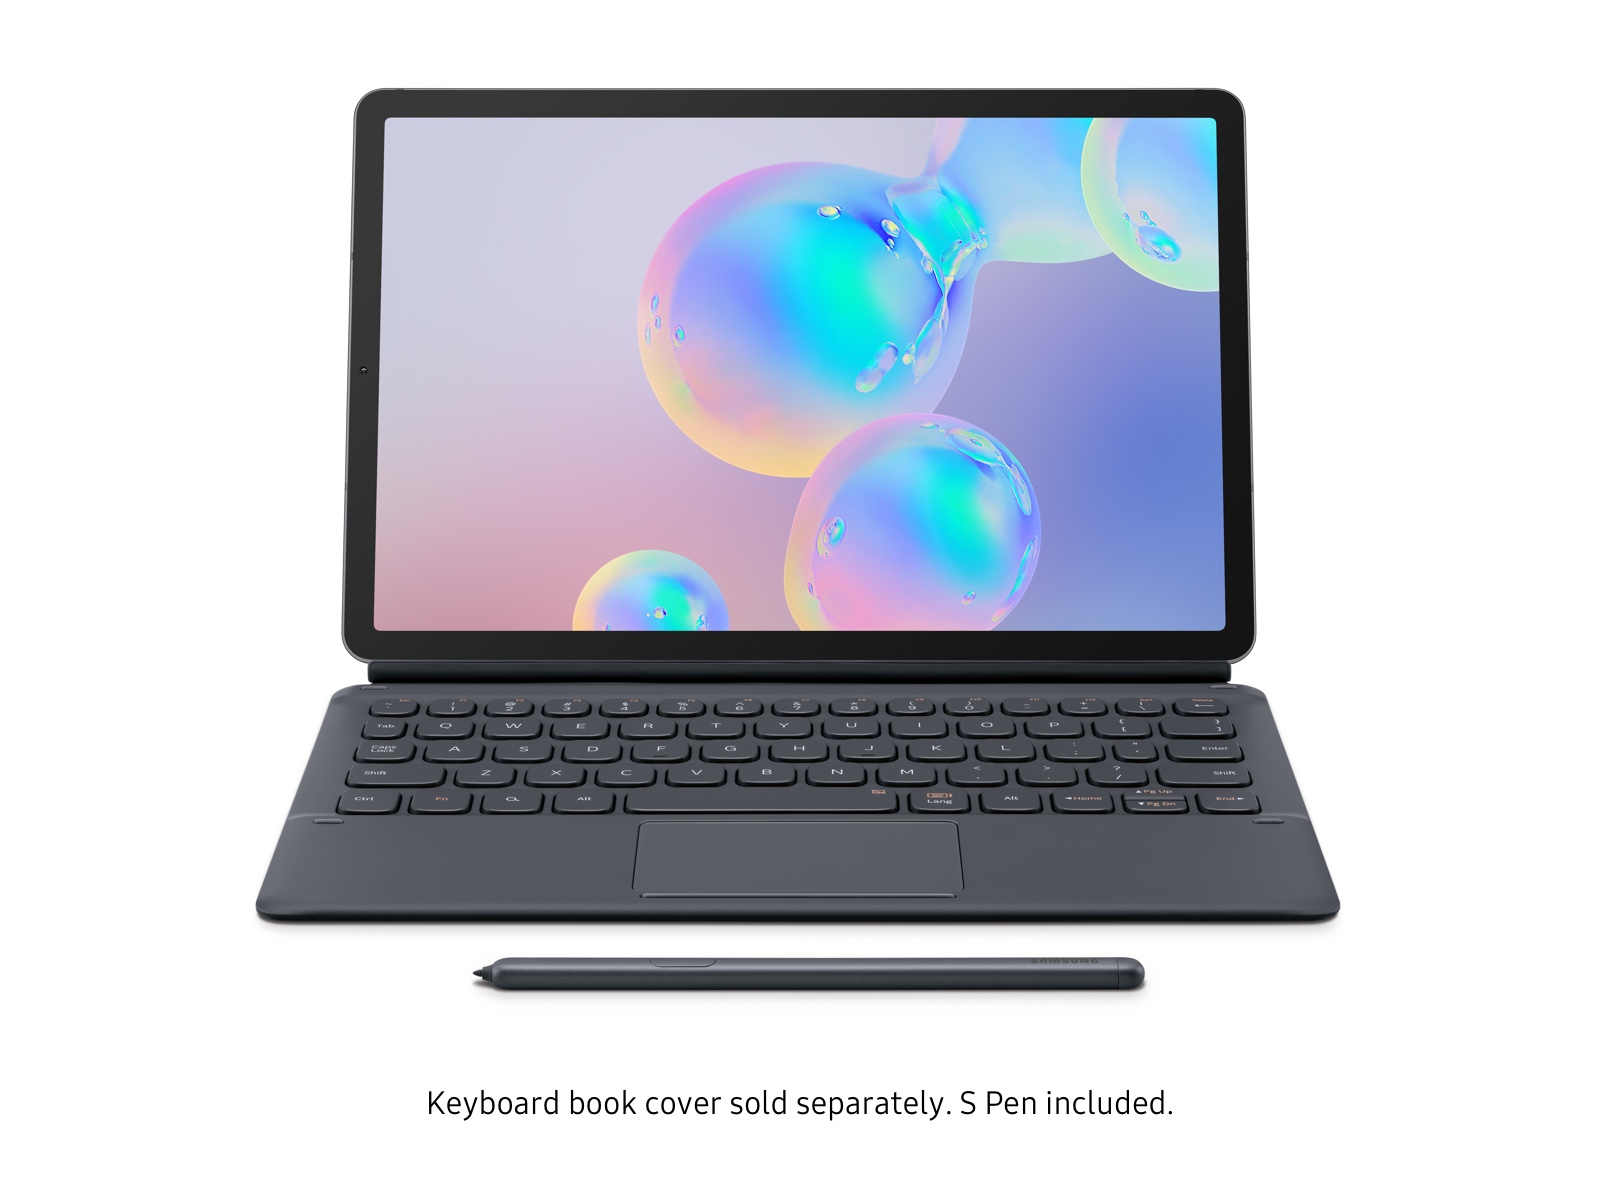 Thumbnail image of Galaxy Tab S6 10.5”, 128GB, Rose Blush (Wi-Fi) S Pen included